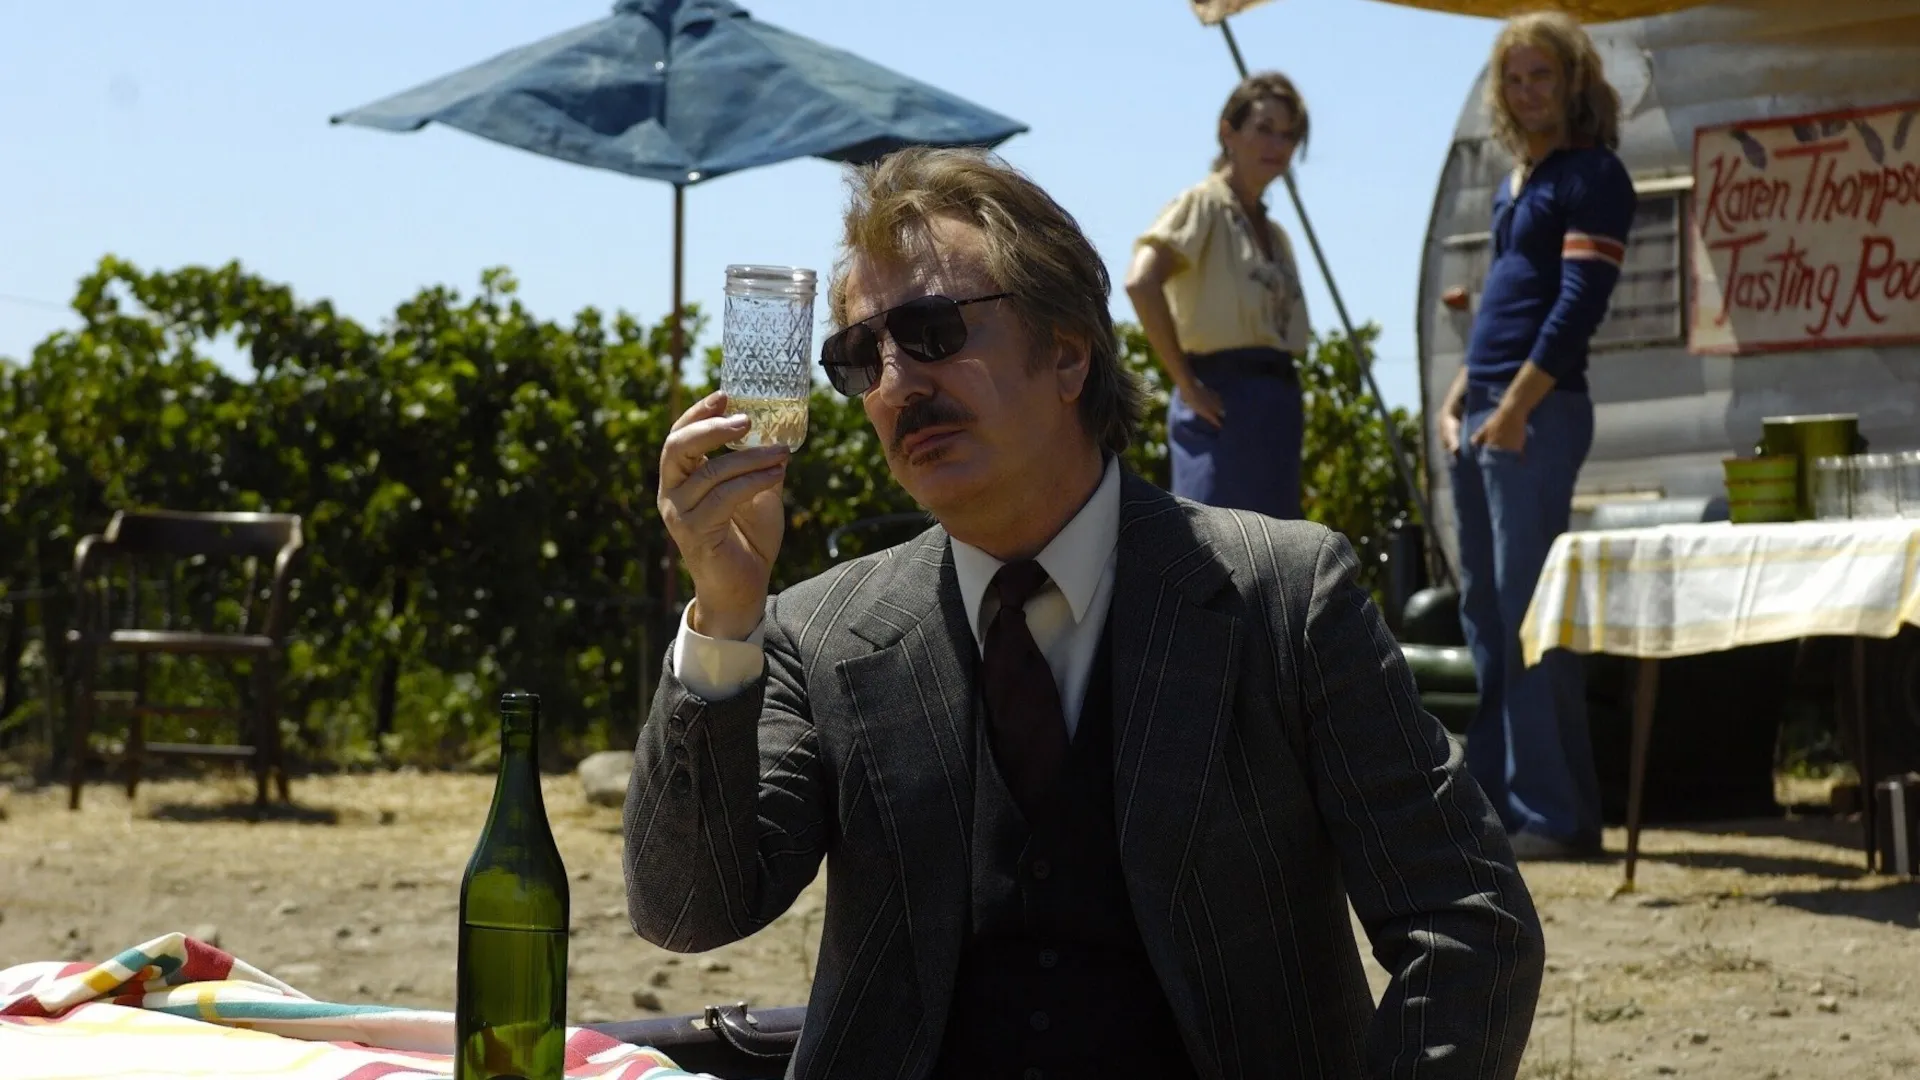 Alan Rickman in the 2008 film "Bottle Shock." Courtesy: Unclaimed Freight Productions